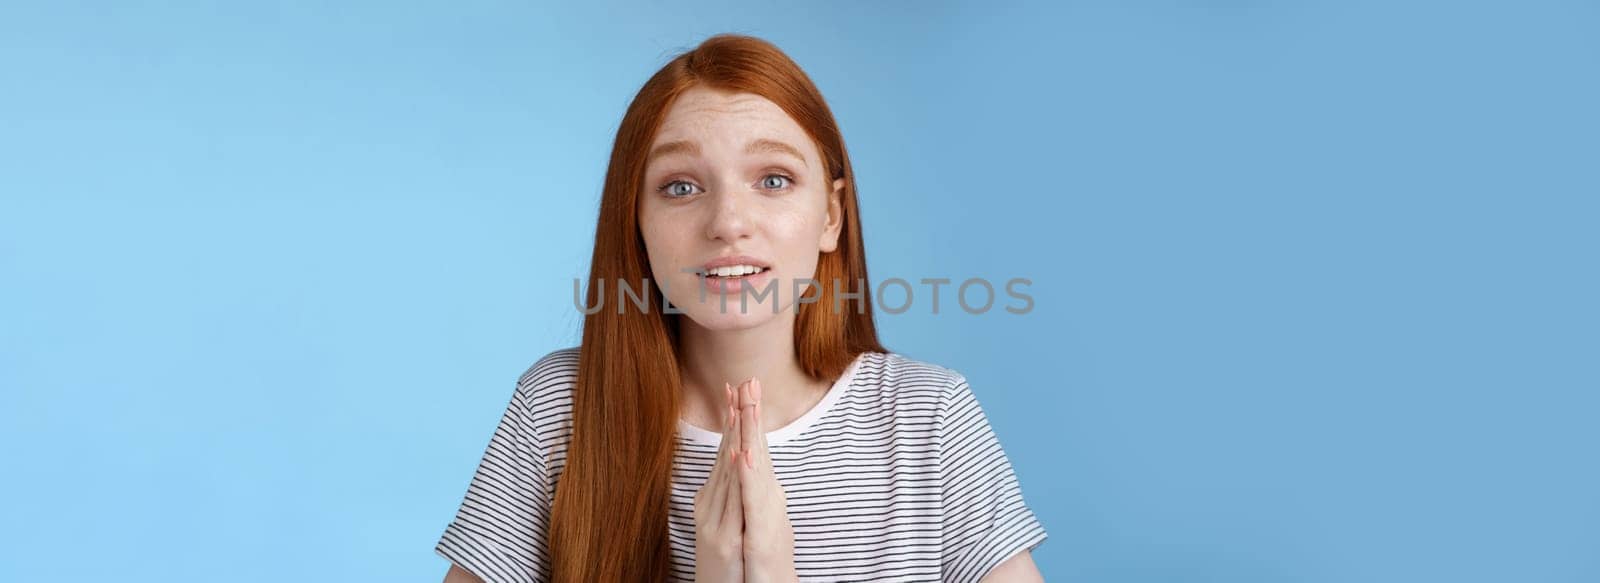 Cute european redhead girl blue eyes straight long ginger hairstyle making promise begging you help press palms together praying say please telling need favour worried pleading, blue background.